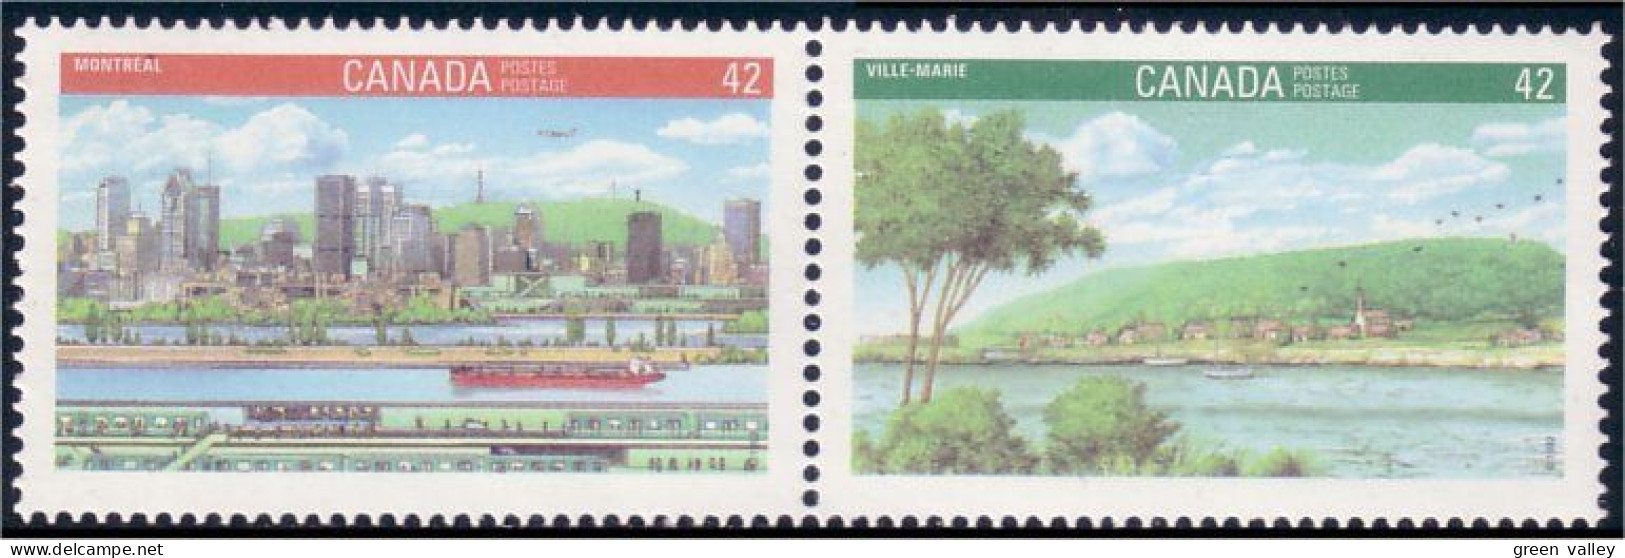 Canada Expo Canada 92 Montreal Ville-Marie MNH ** Neuf SC (C14-05aa) - Ungebraucht